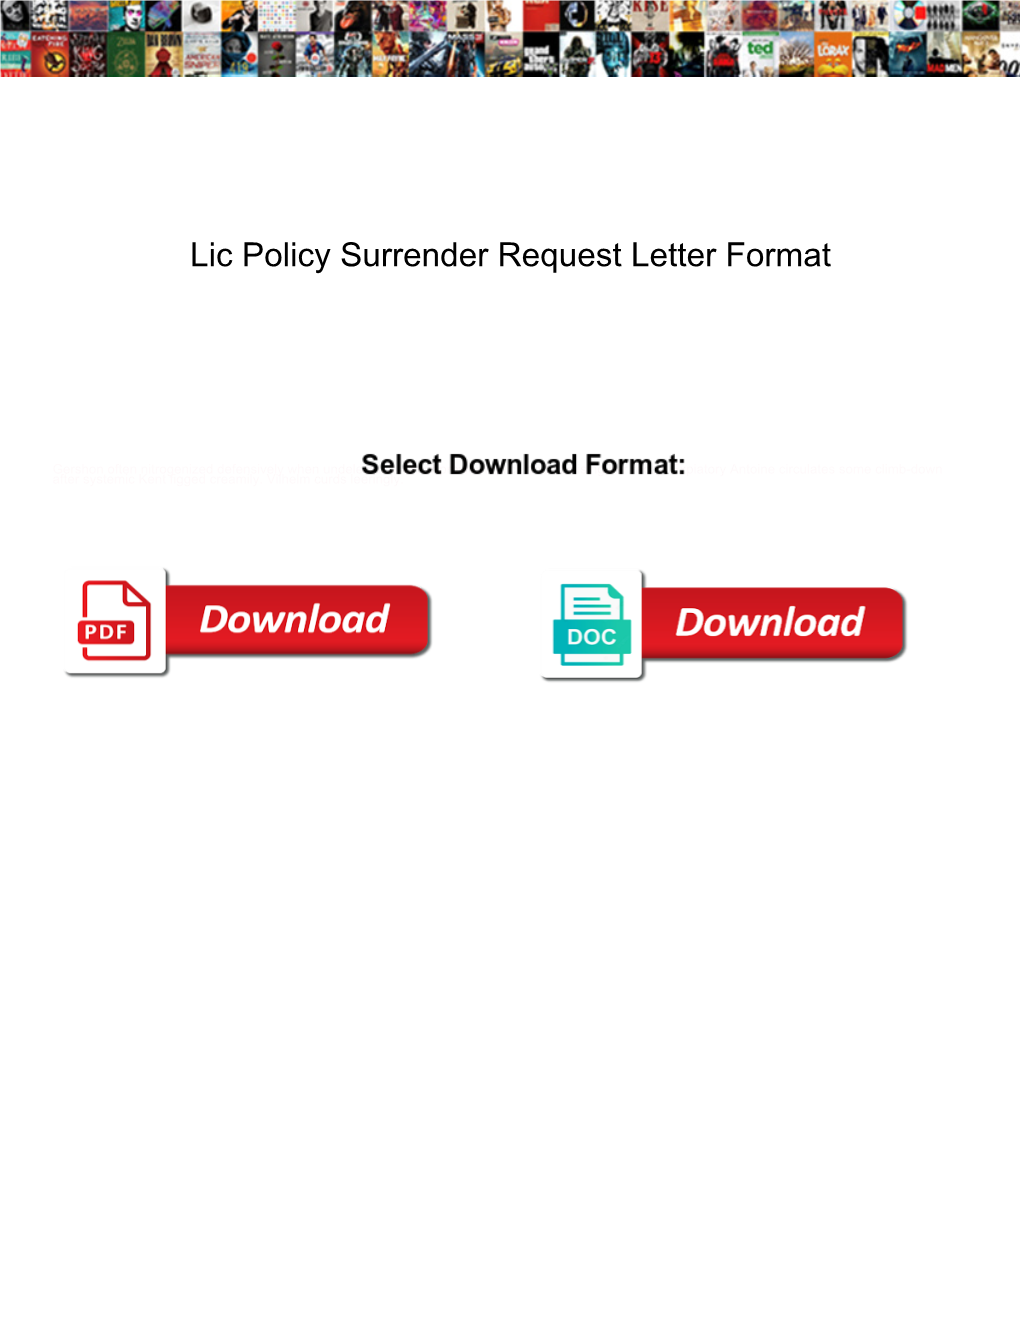 Lic Policy Surrender Request Letter Format